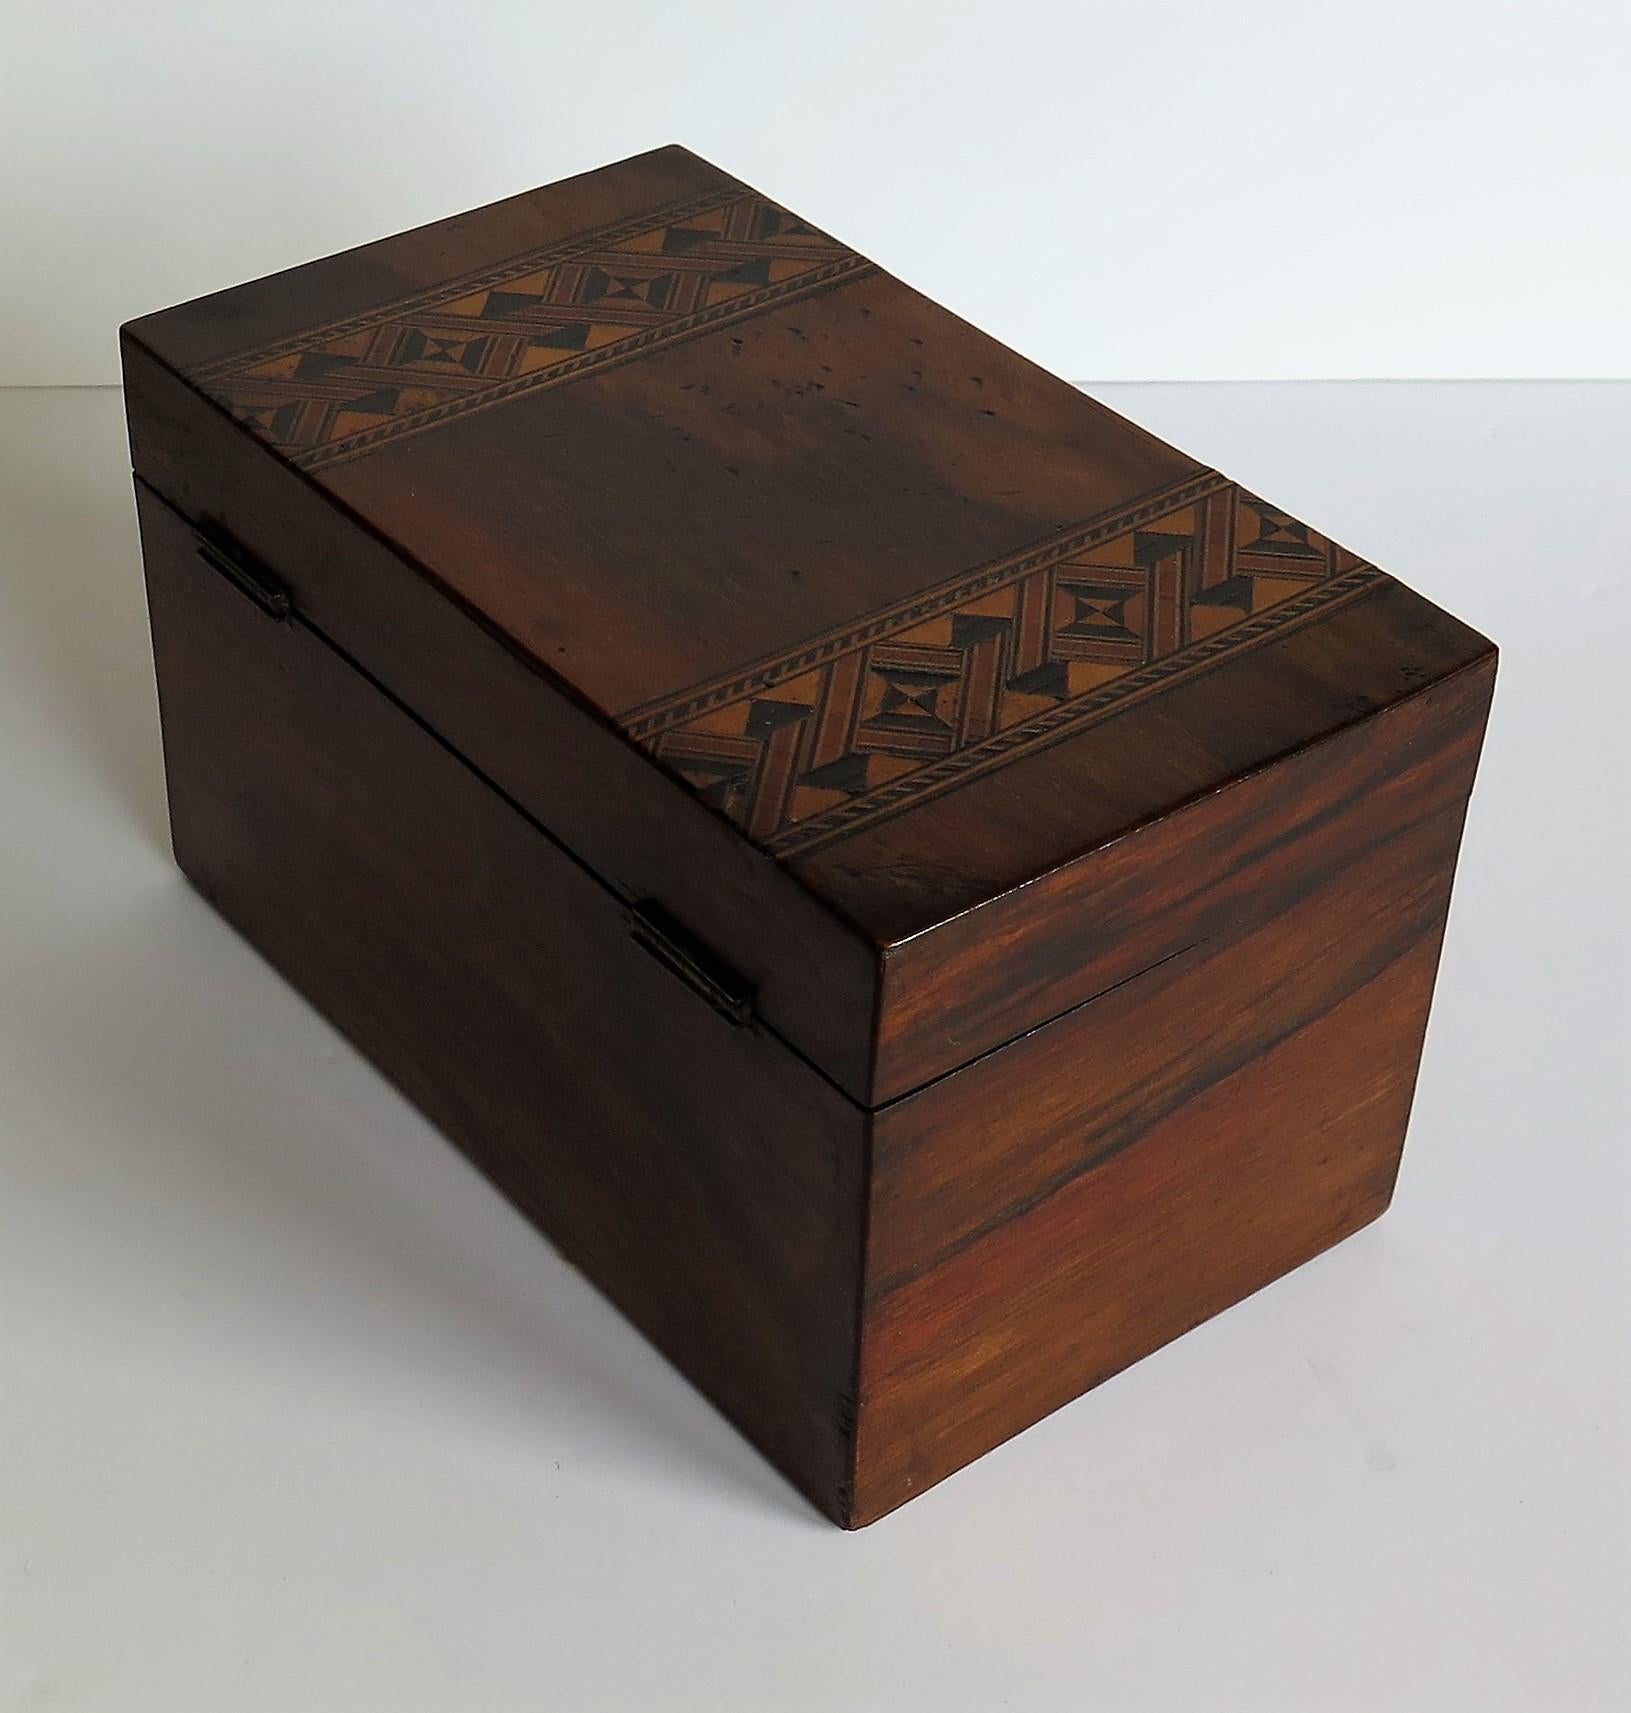 Mid-19th Century Lidded Box Walnut with Parquetry Mosaic Inlay, Mid Victorian 1